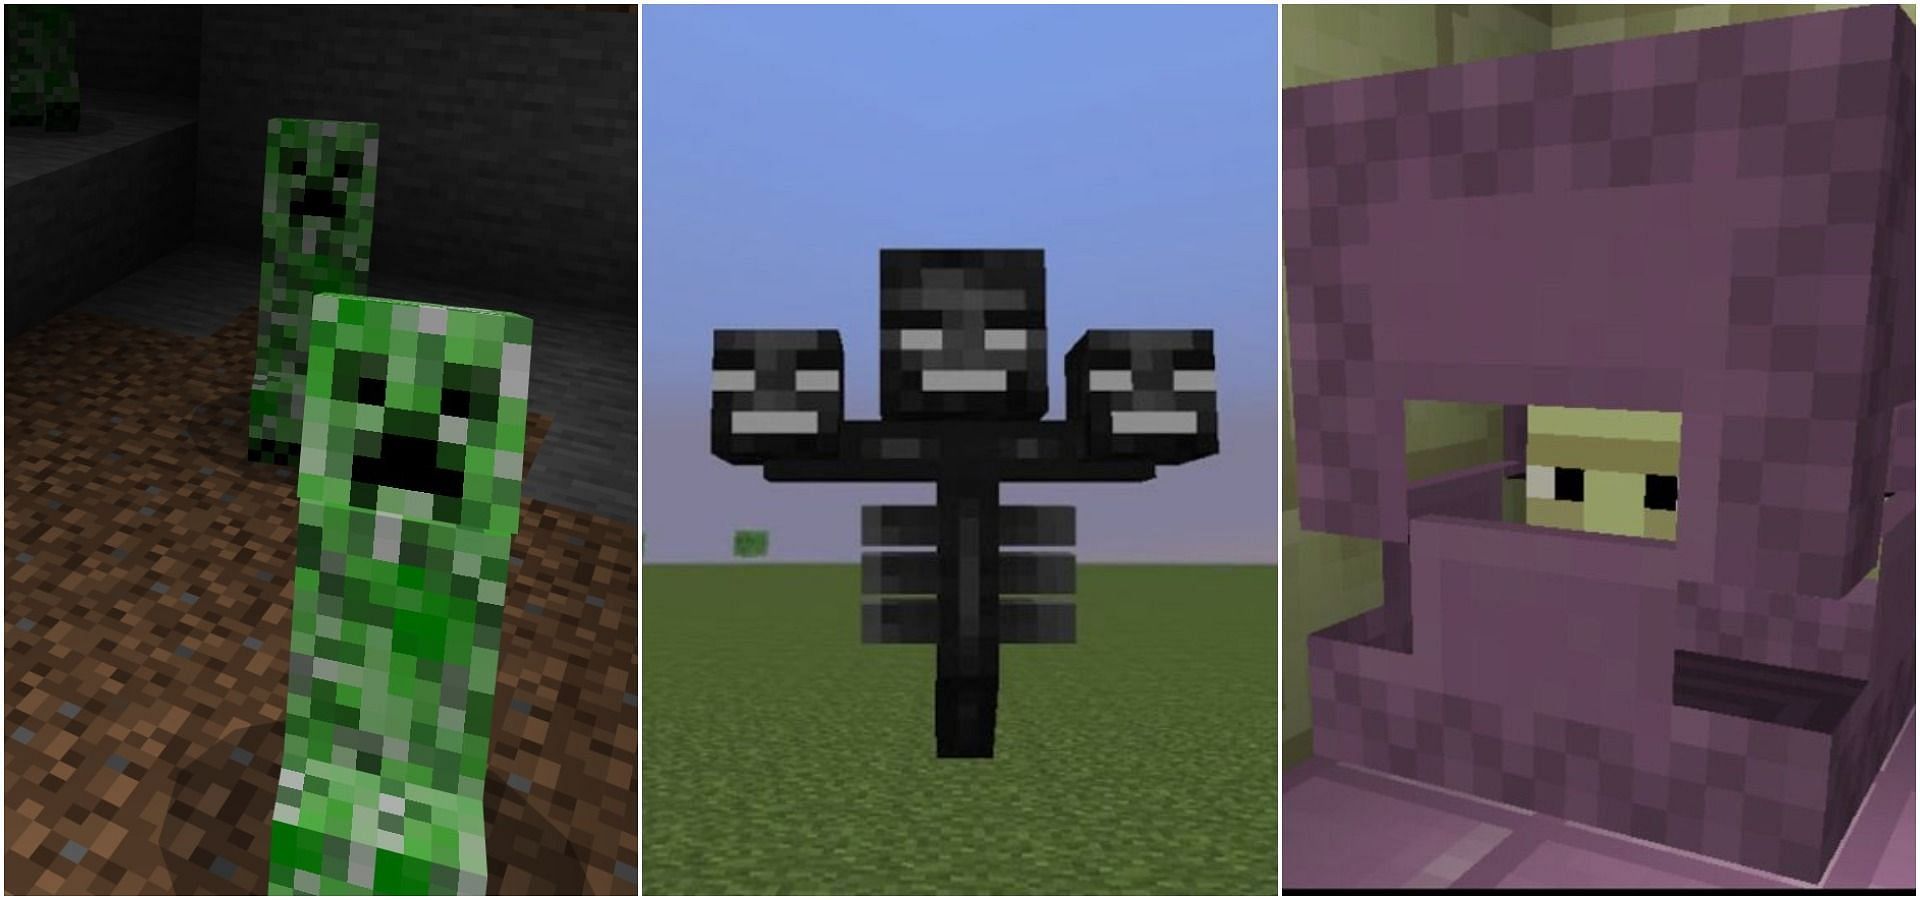 Creeper, Wither, Shulker (Image via Minecraft)